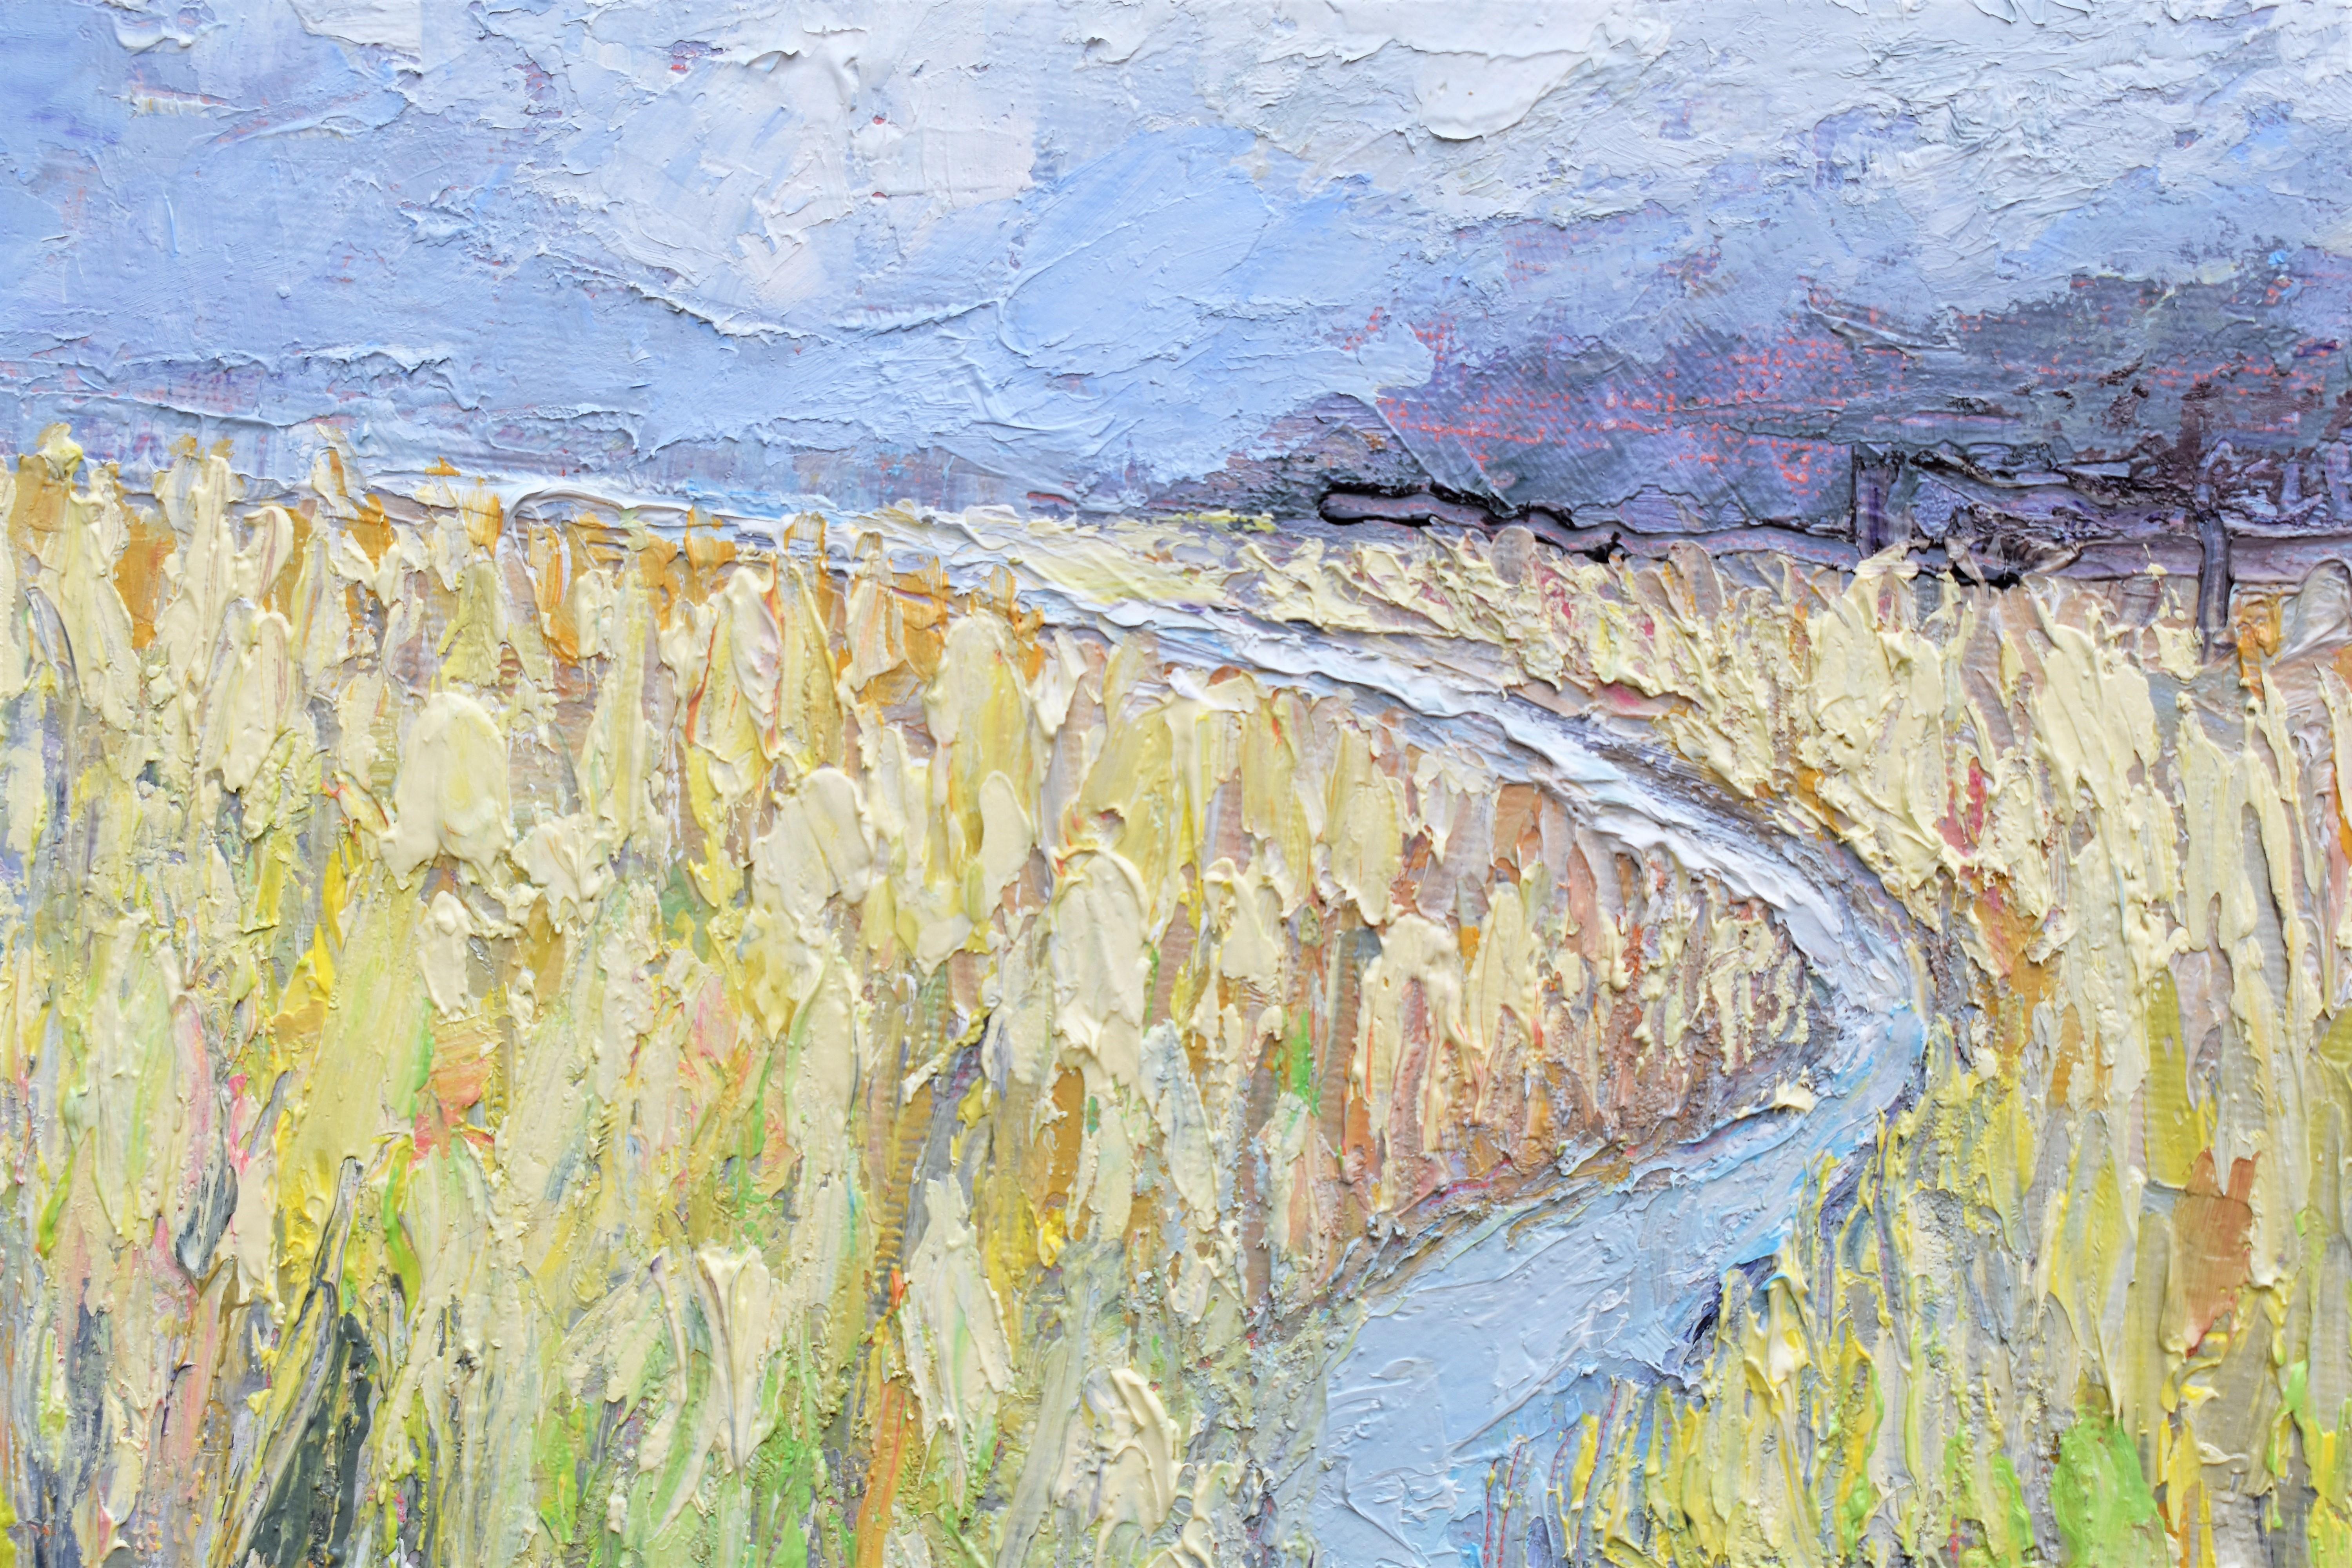 <p>Artist Comments<br>Water winds through a peaceful golden marsh by artist Mary Pratt. Green, orange, and pale yellows define the tall grasses as they extend towards the horizon. Clouds drift in a clear blue sky while a shadow of a mountain appears